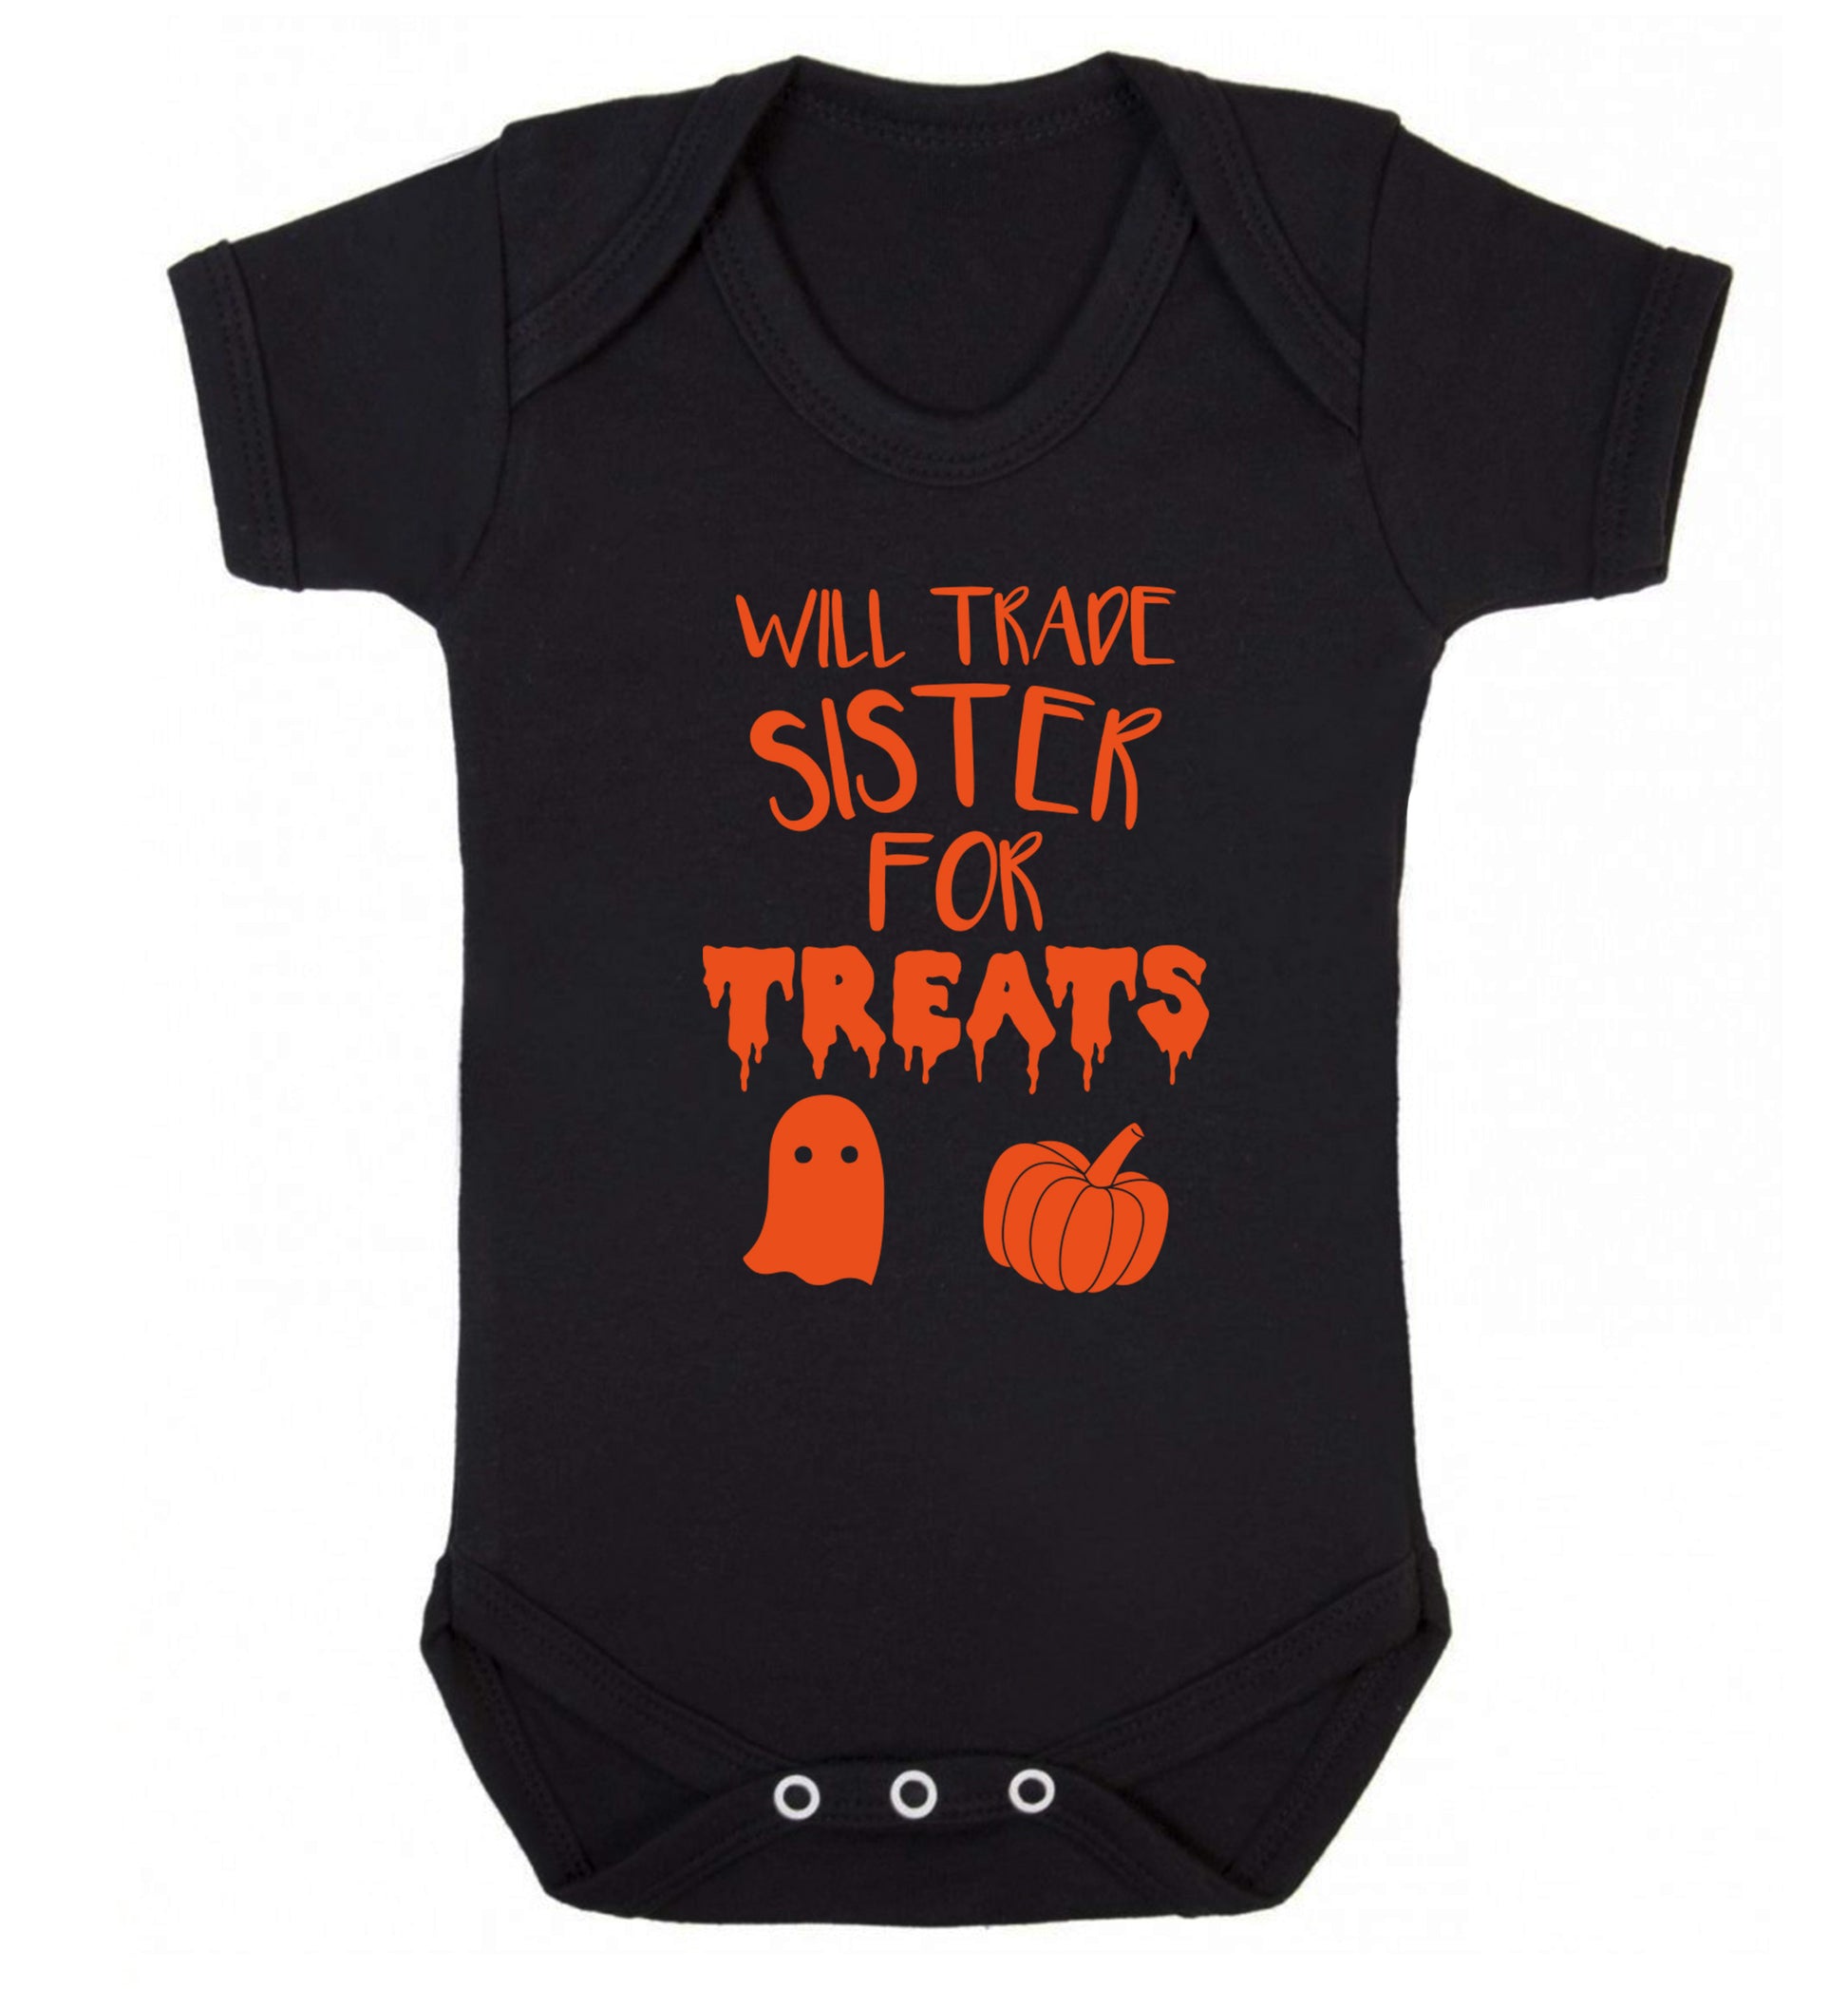 Will trade sister for treats Baby Vest black 18-24 months